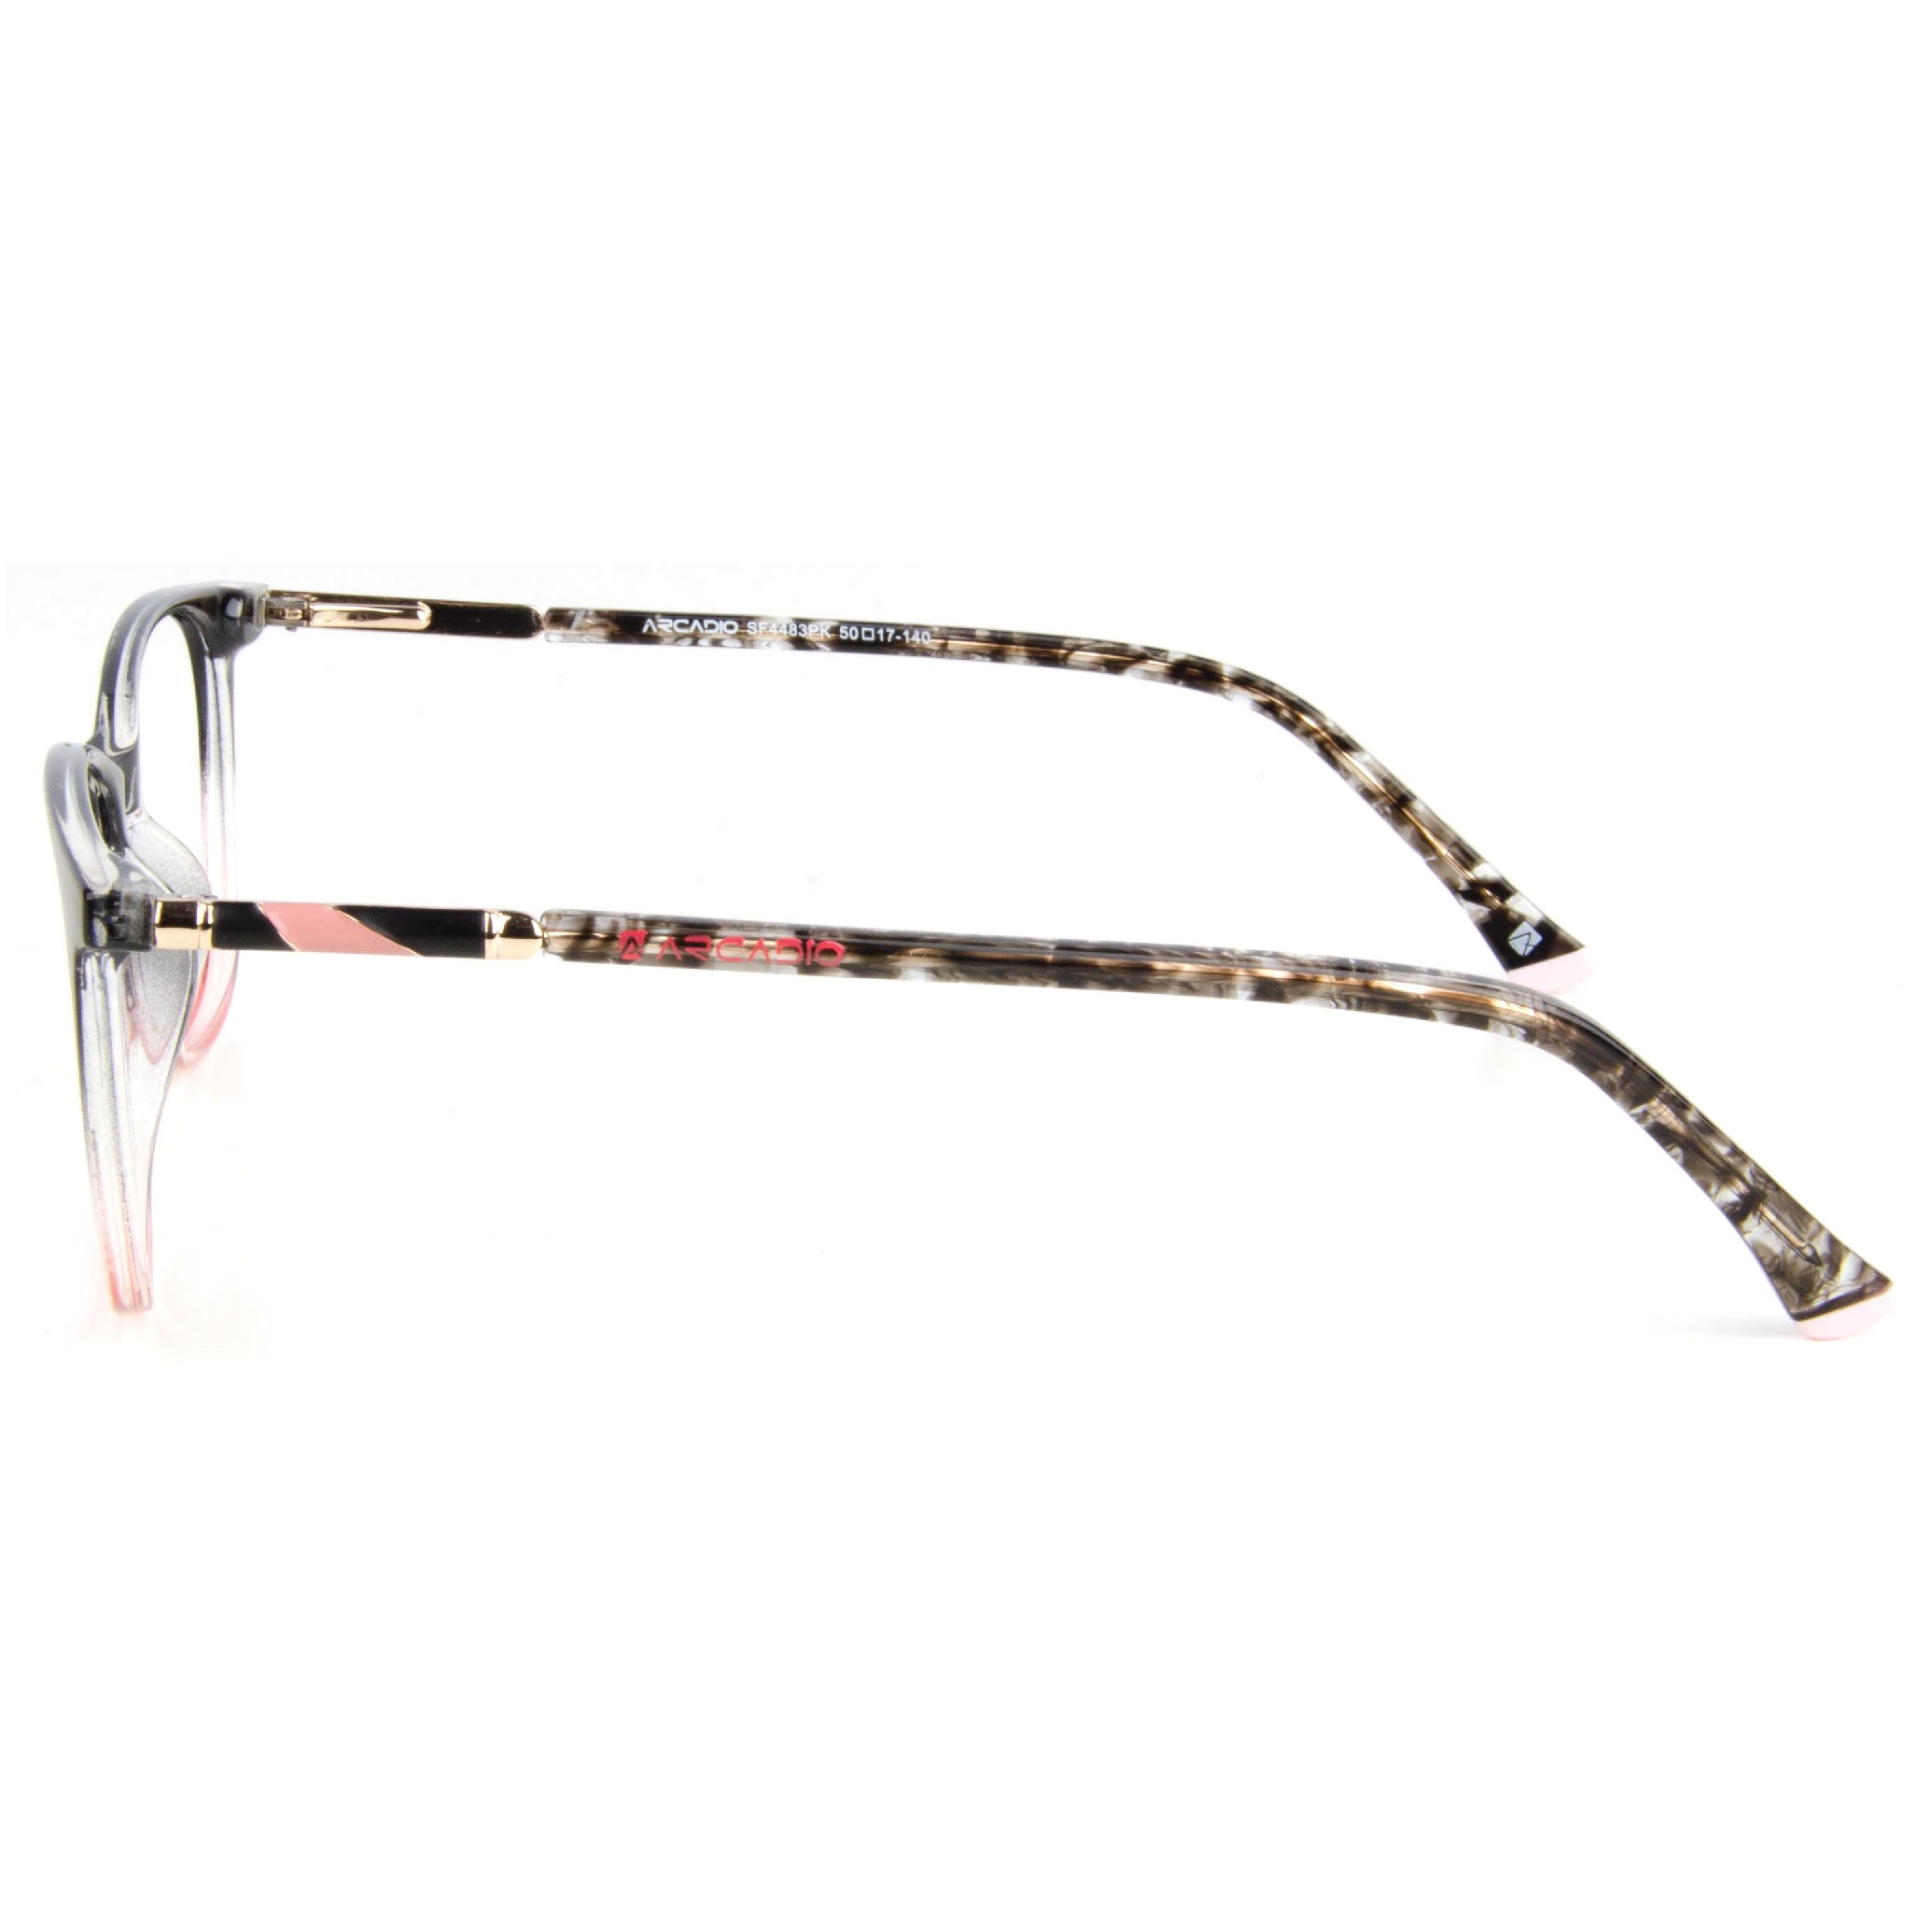 HALEY Urban Modified Square Frame For Women SF4483 ARCADIO